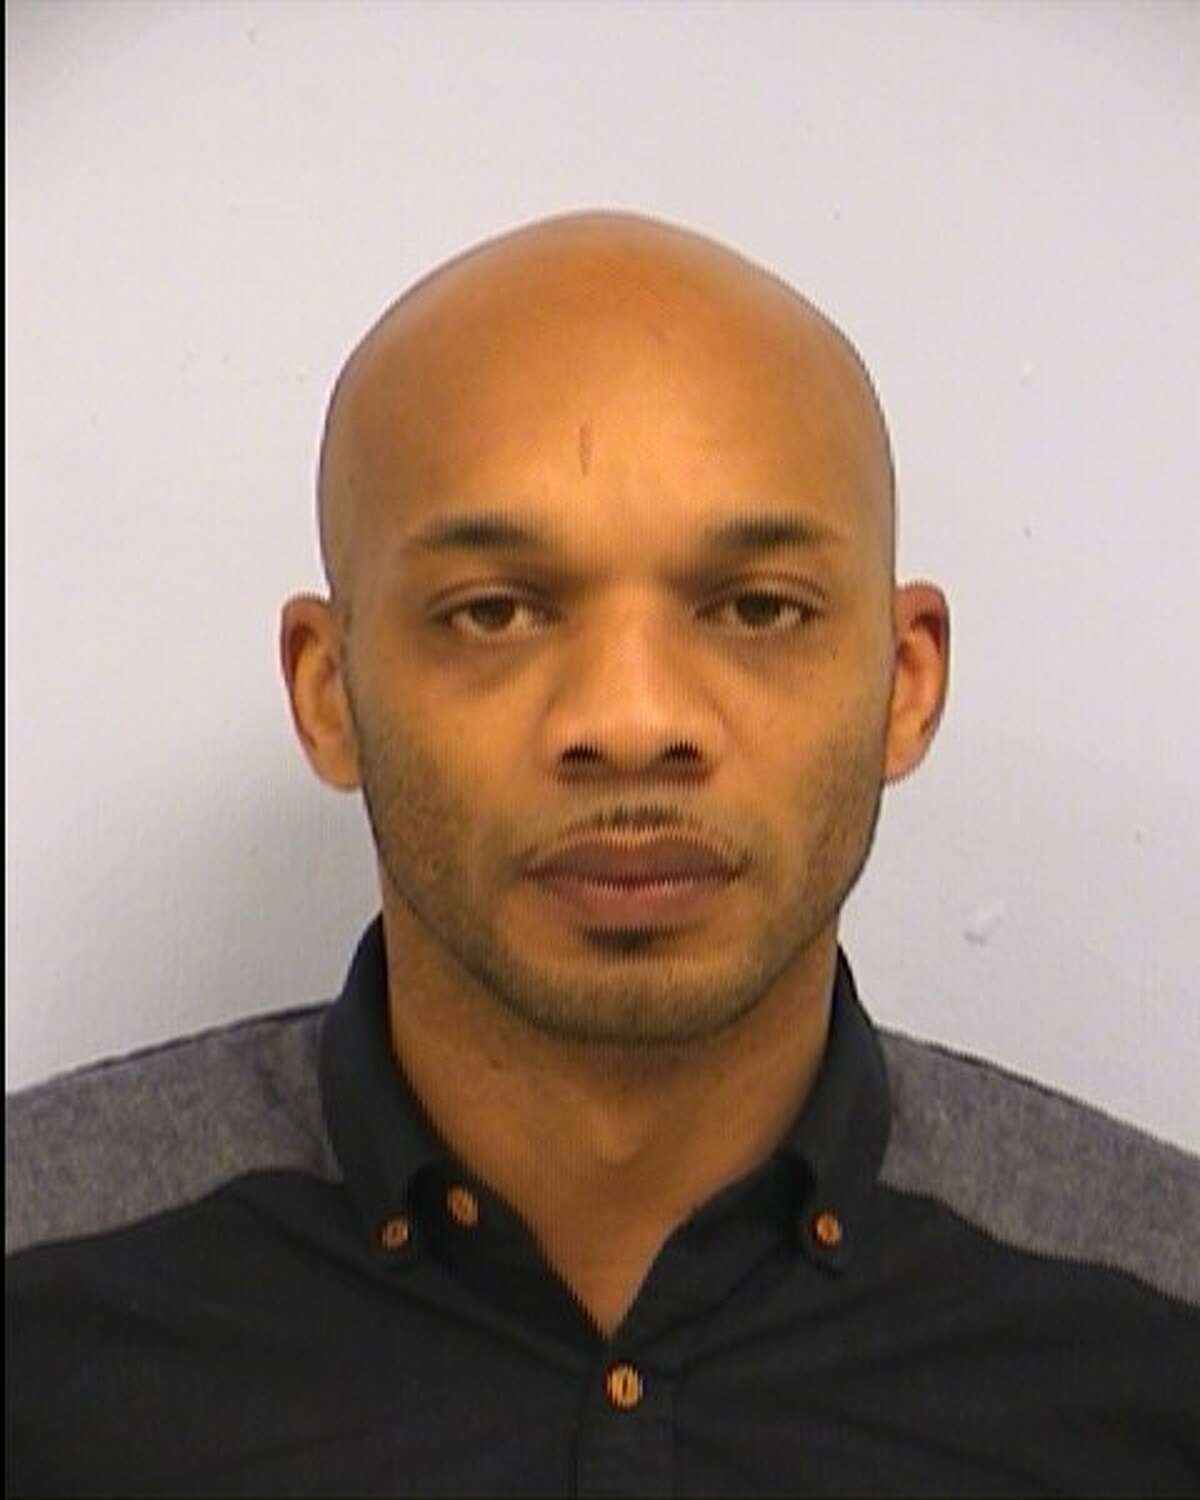 Lee Samuel Dobbins, 35, of Pflugerville, is accused of leaving his autistic 3-year-old son at home while going to a strip club. He faces a felony charge.